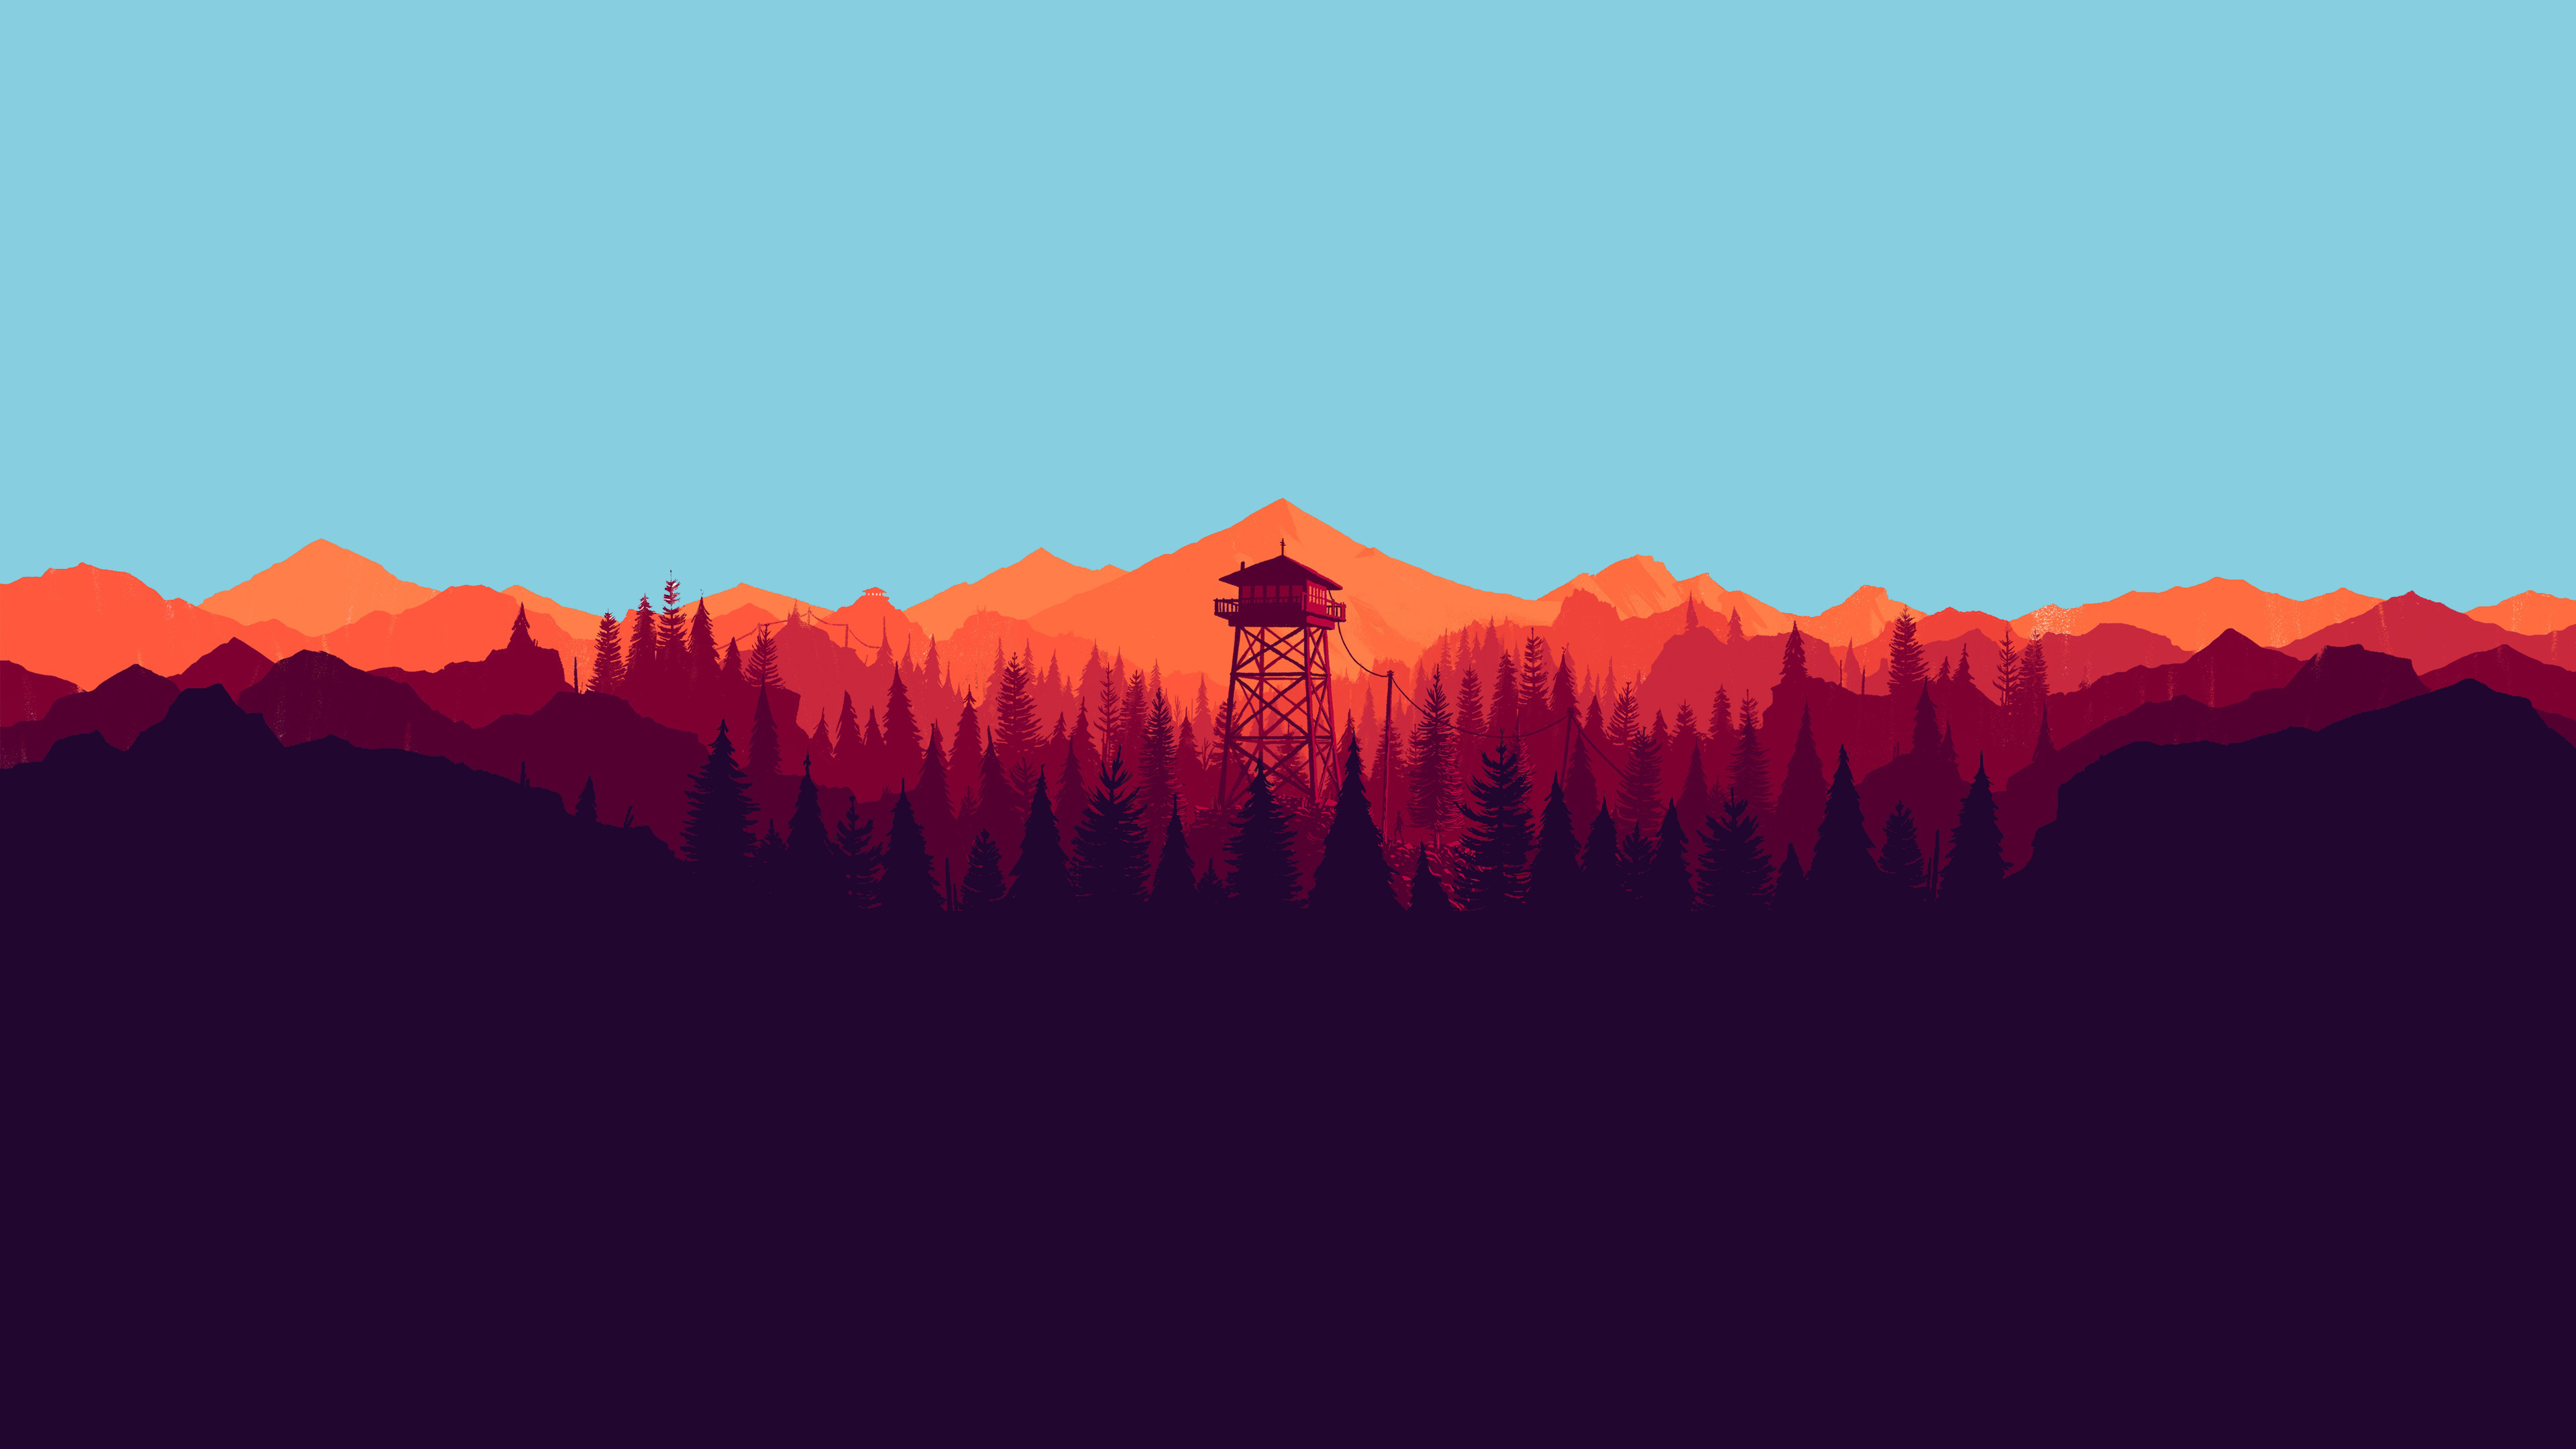 Played With Colors For Desktop Background Think It Pops A Little